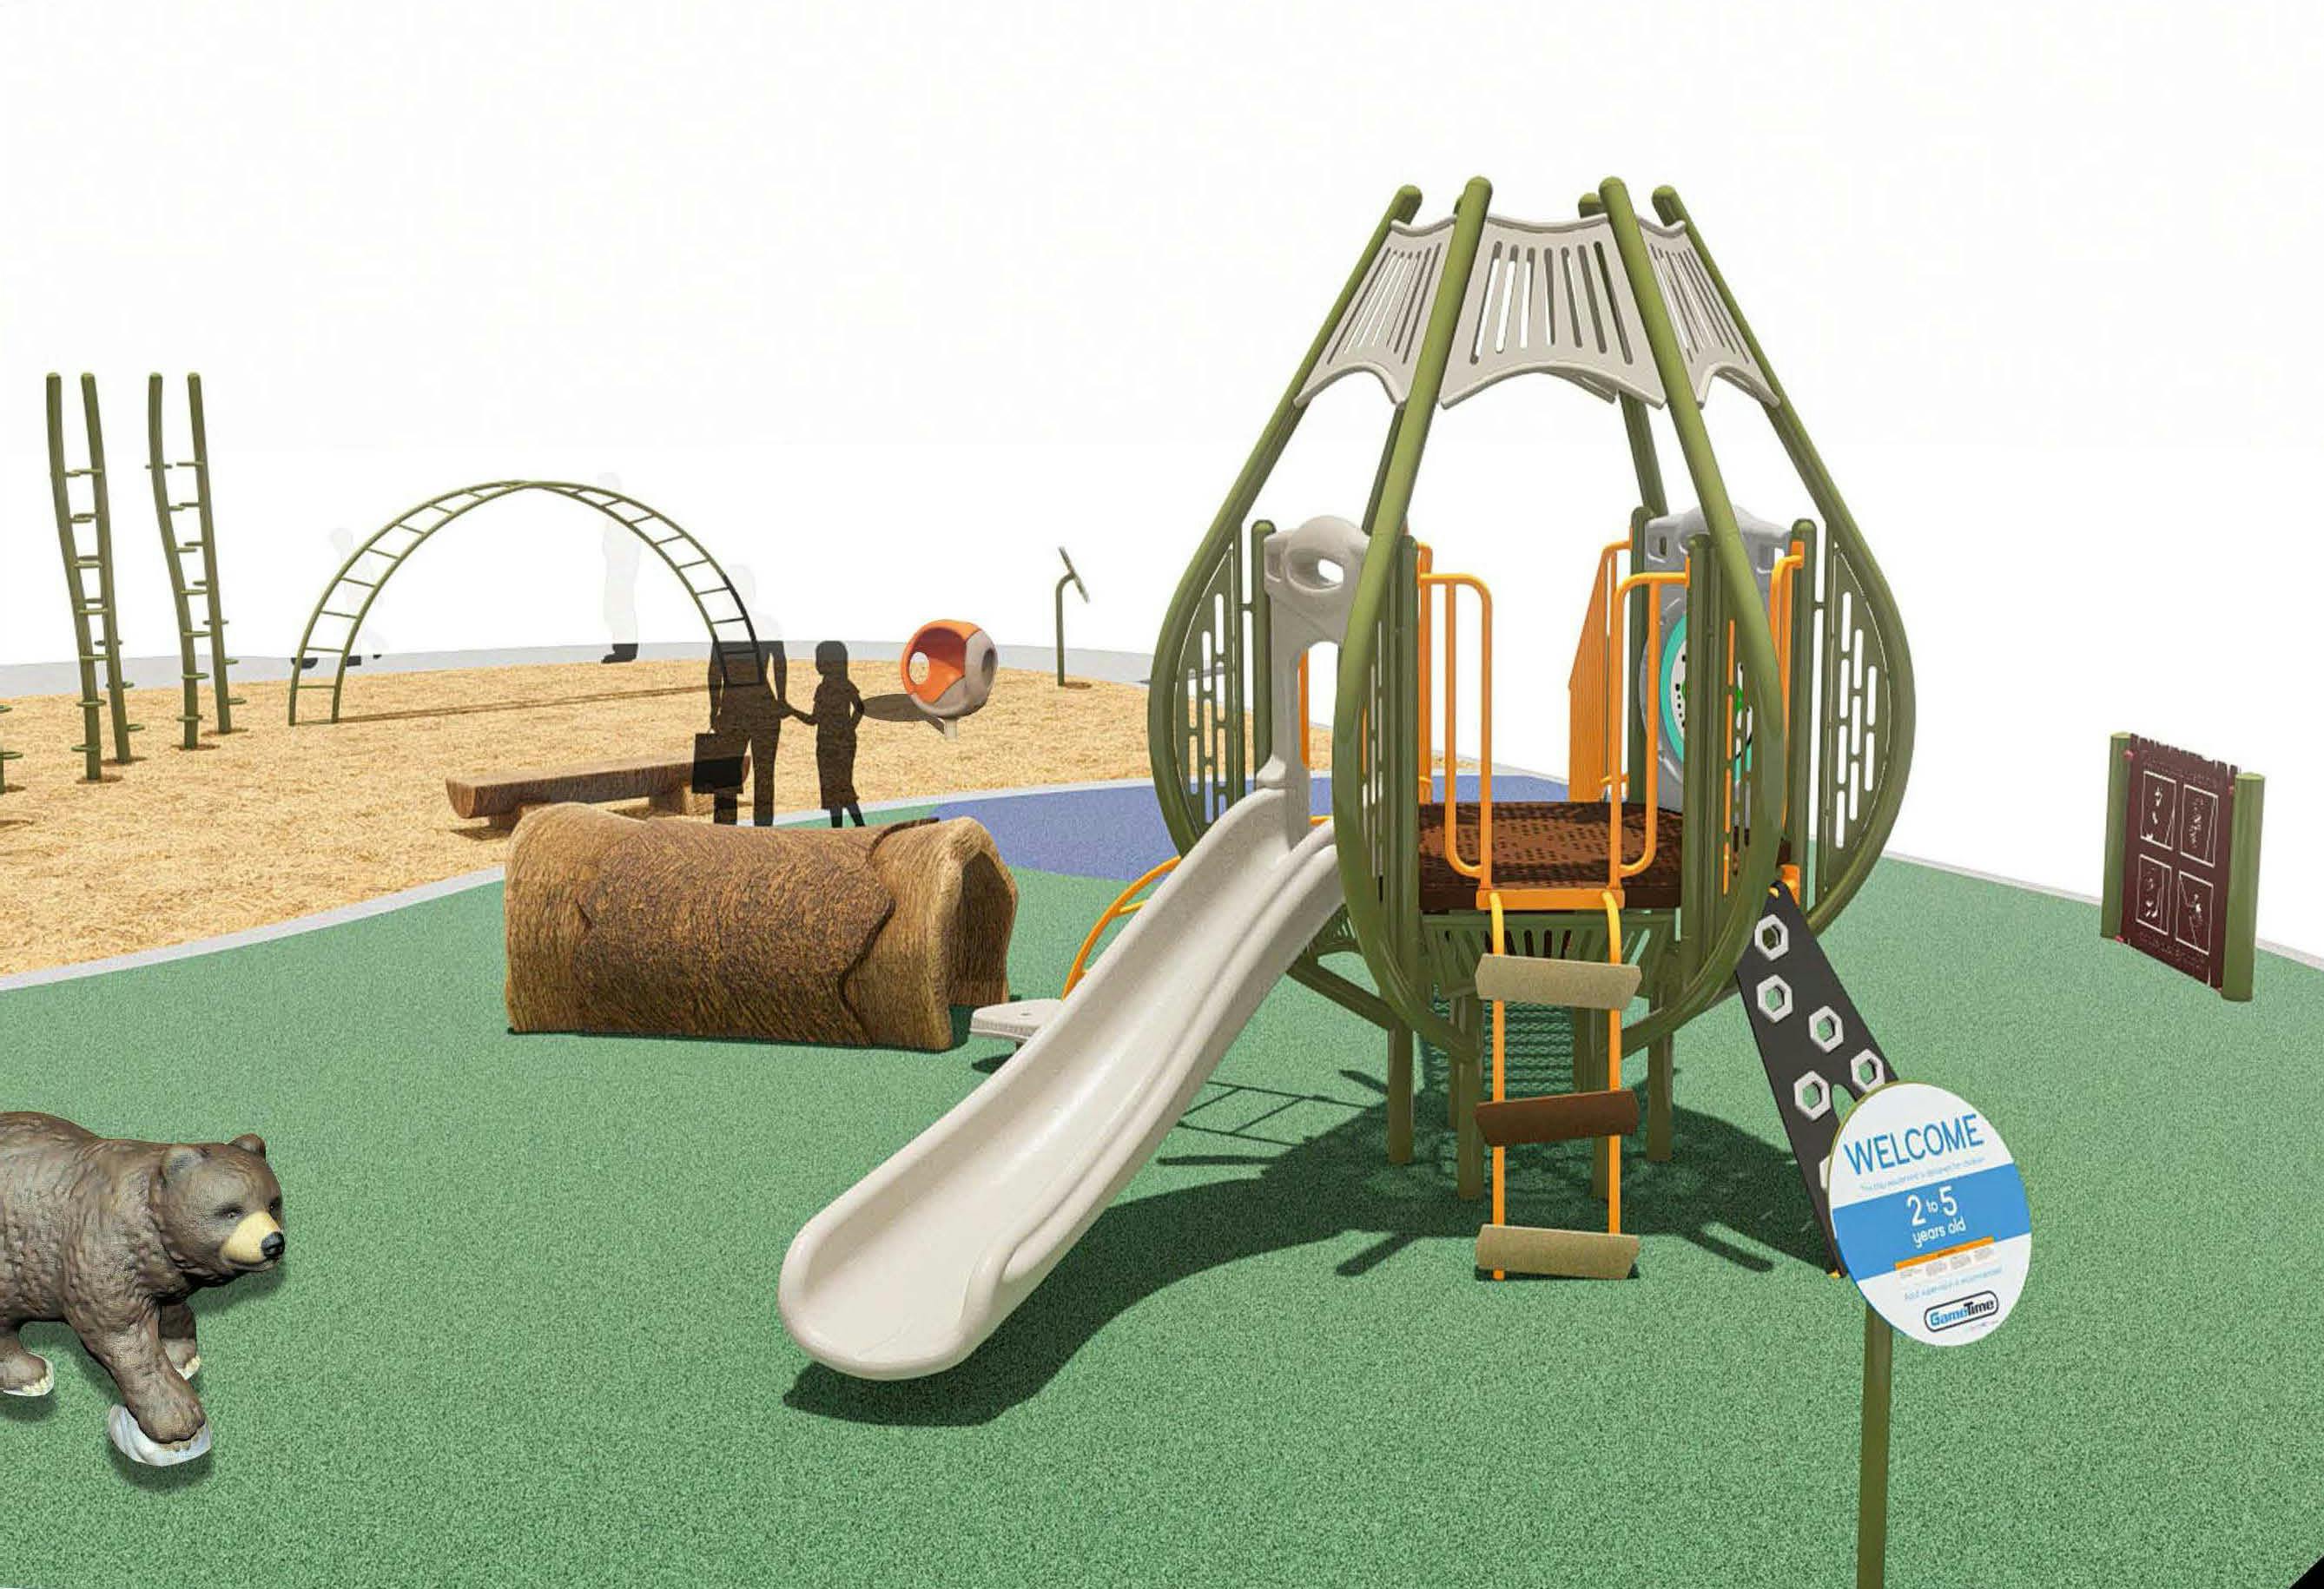 Young children's play area view 1